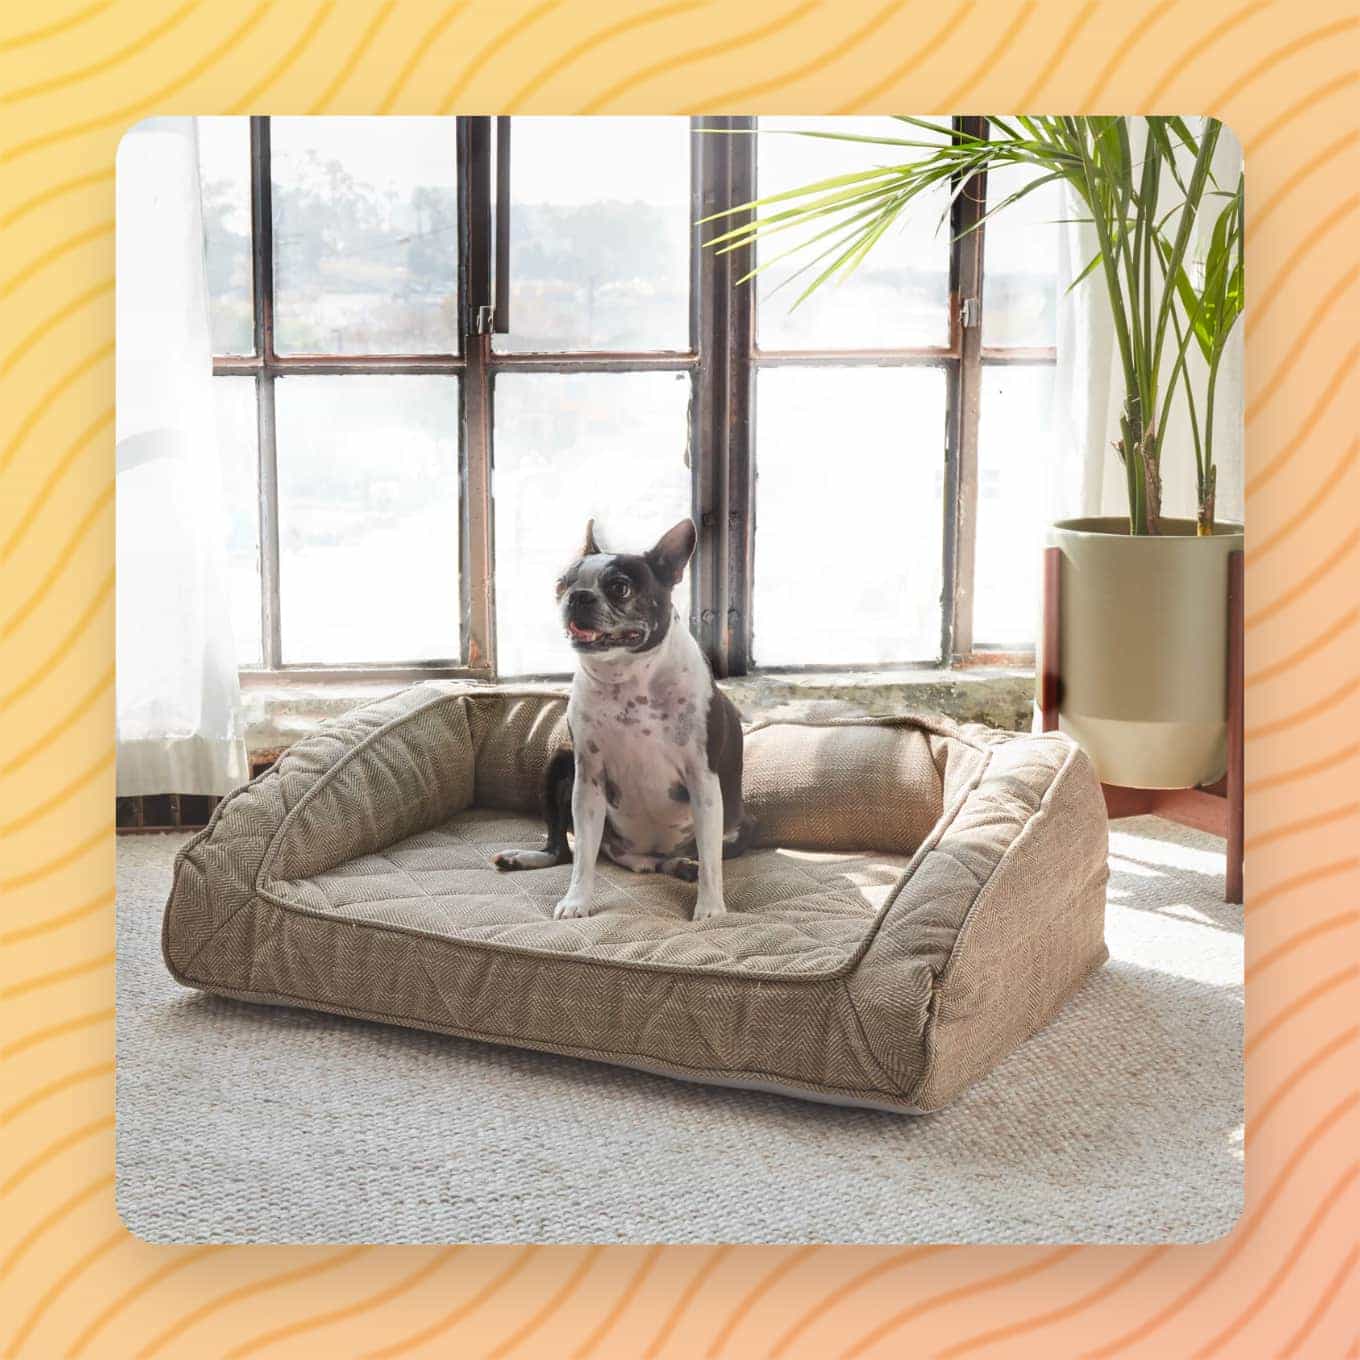 A dog sitting in a bolster-style Runyon Orthopedic Dog Bed by a window